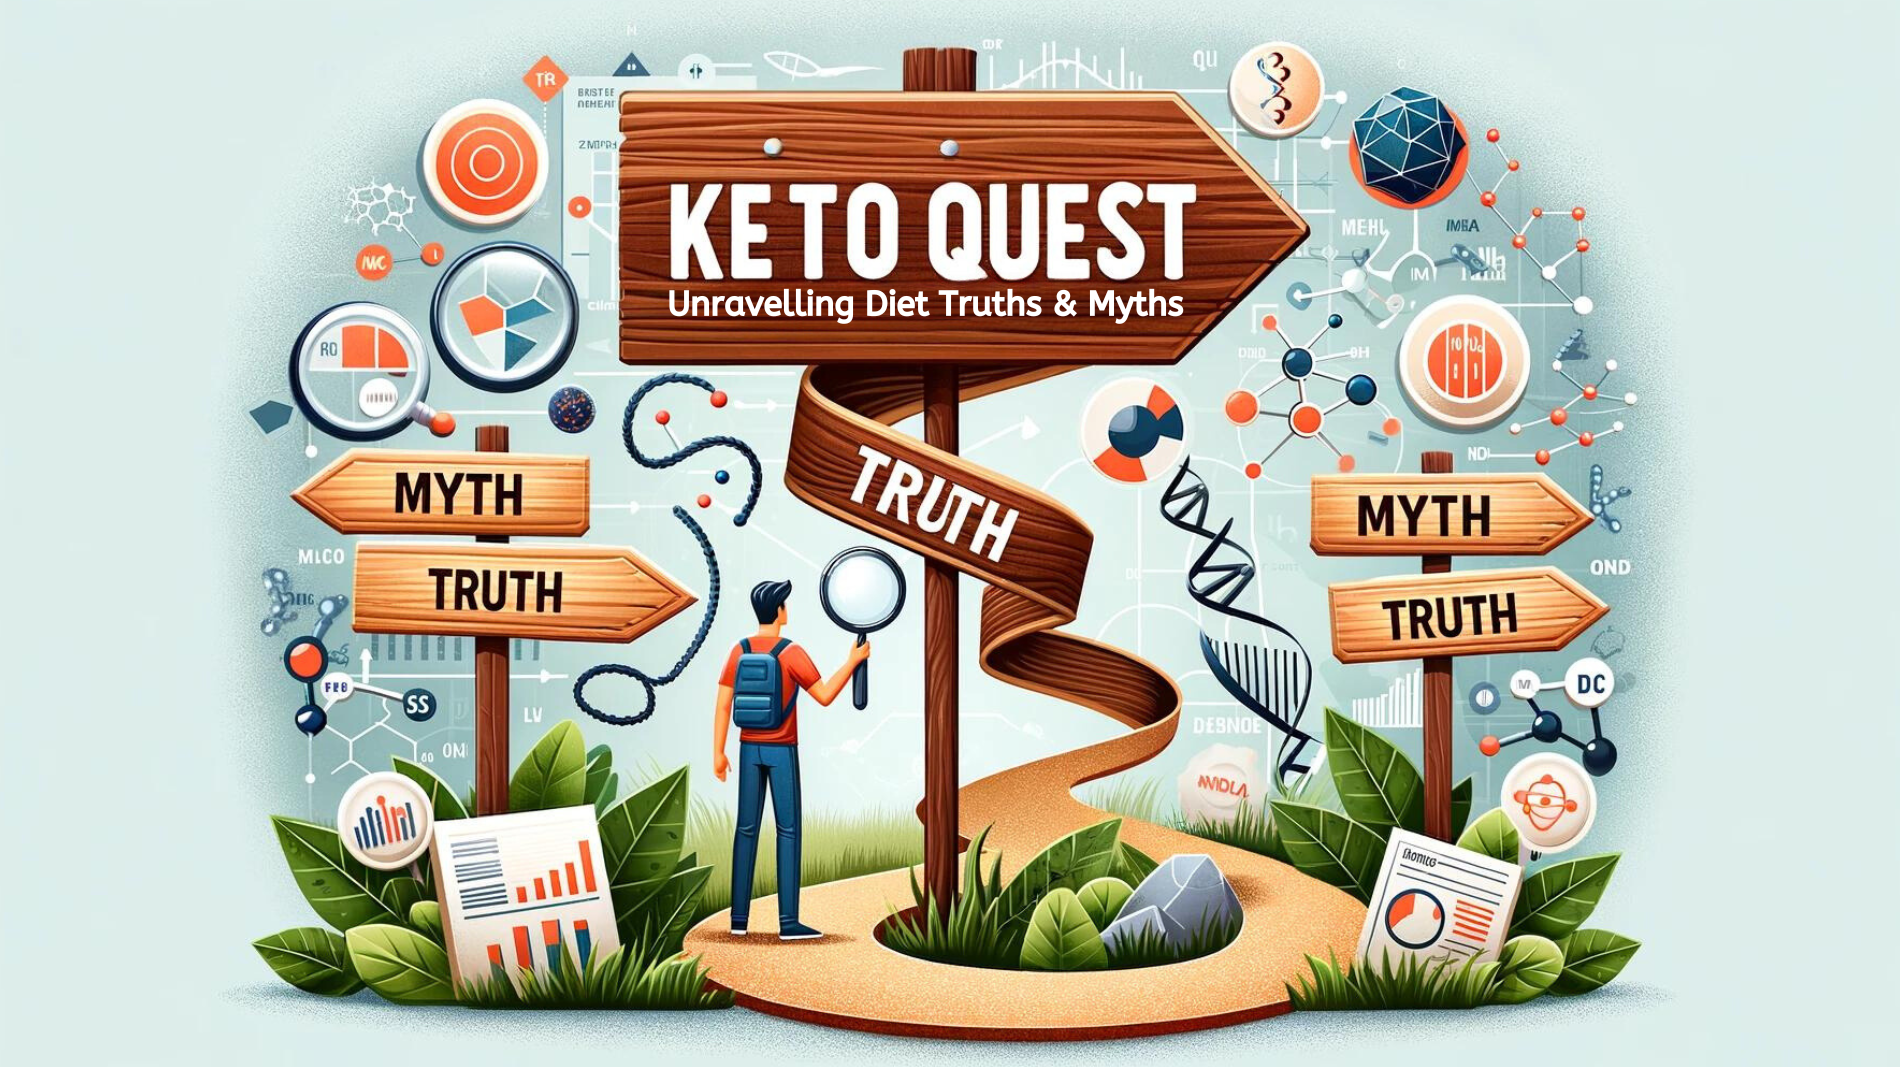 Keto Quest: Unravelling Diet Truths & Myths